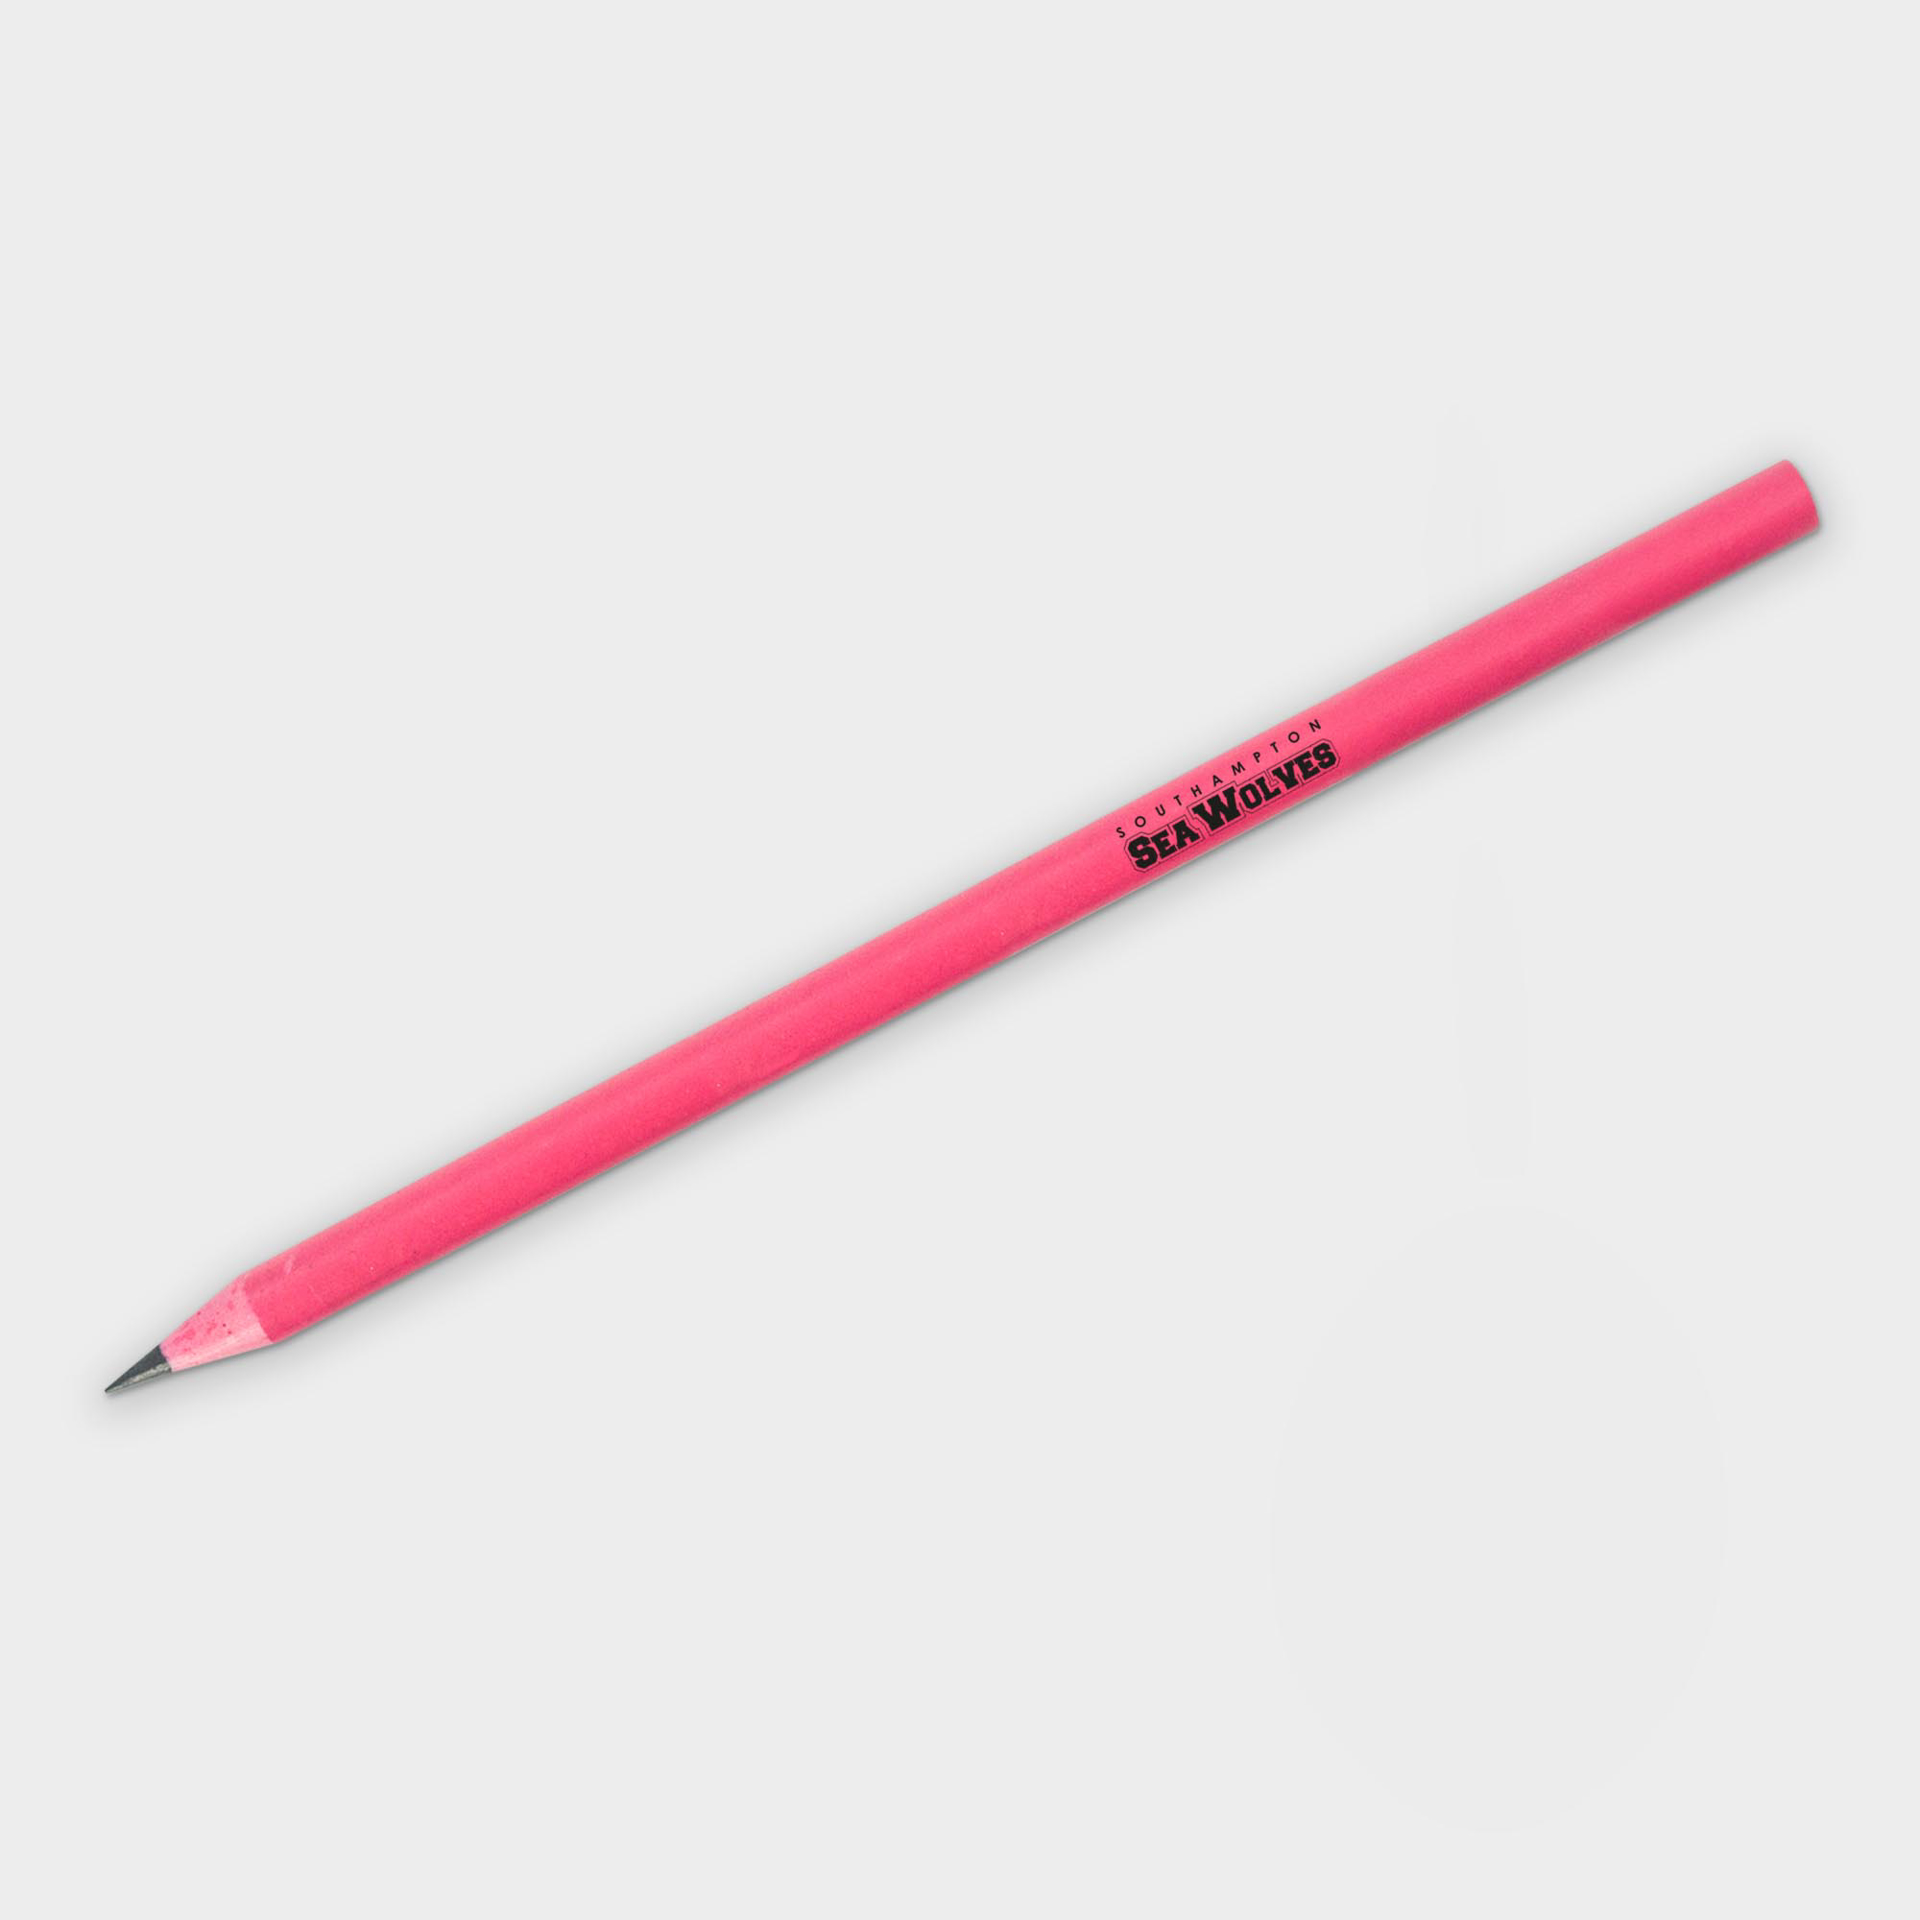 Recycled CD Pencil in pink with 1 colour print